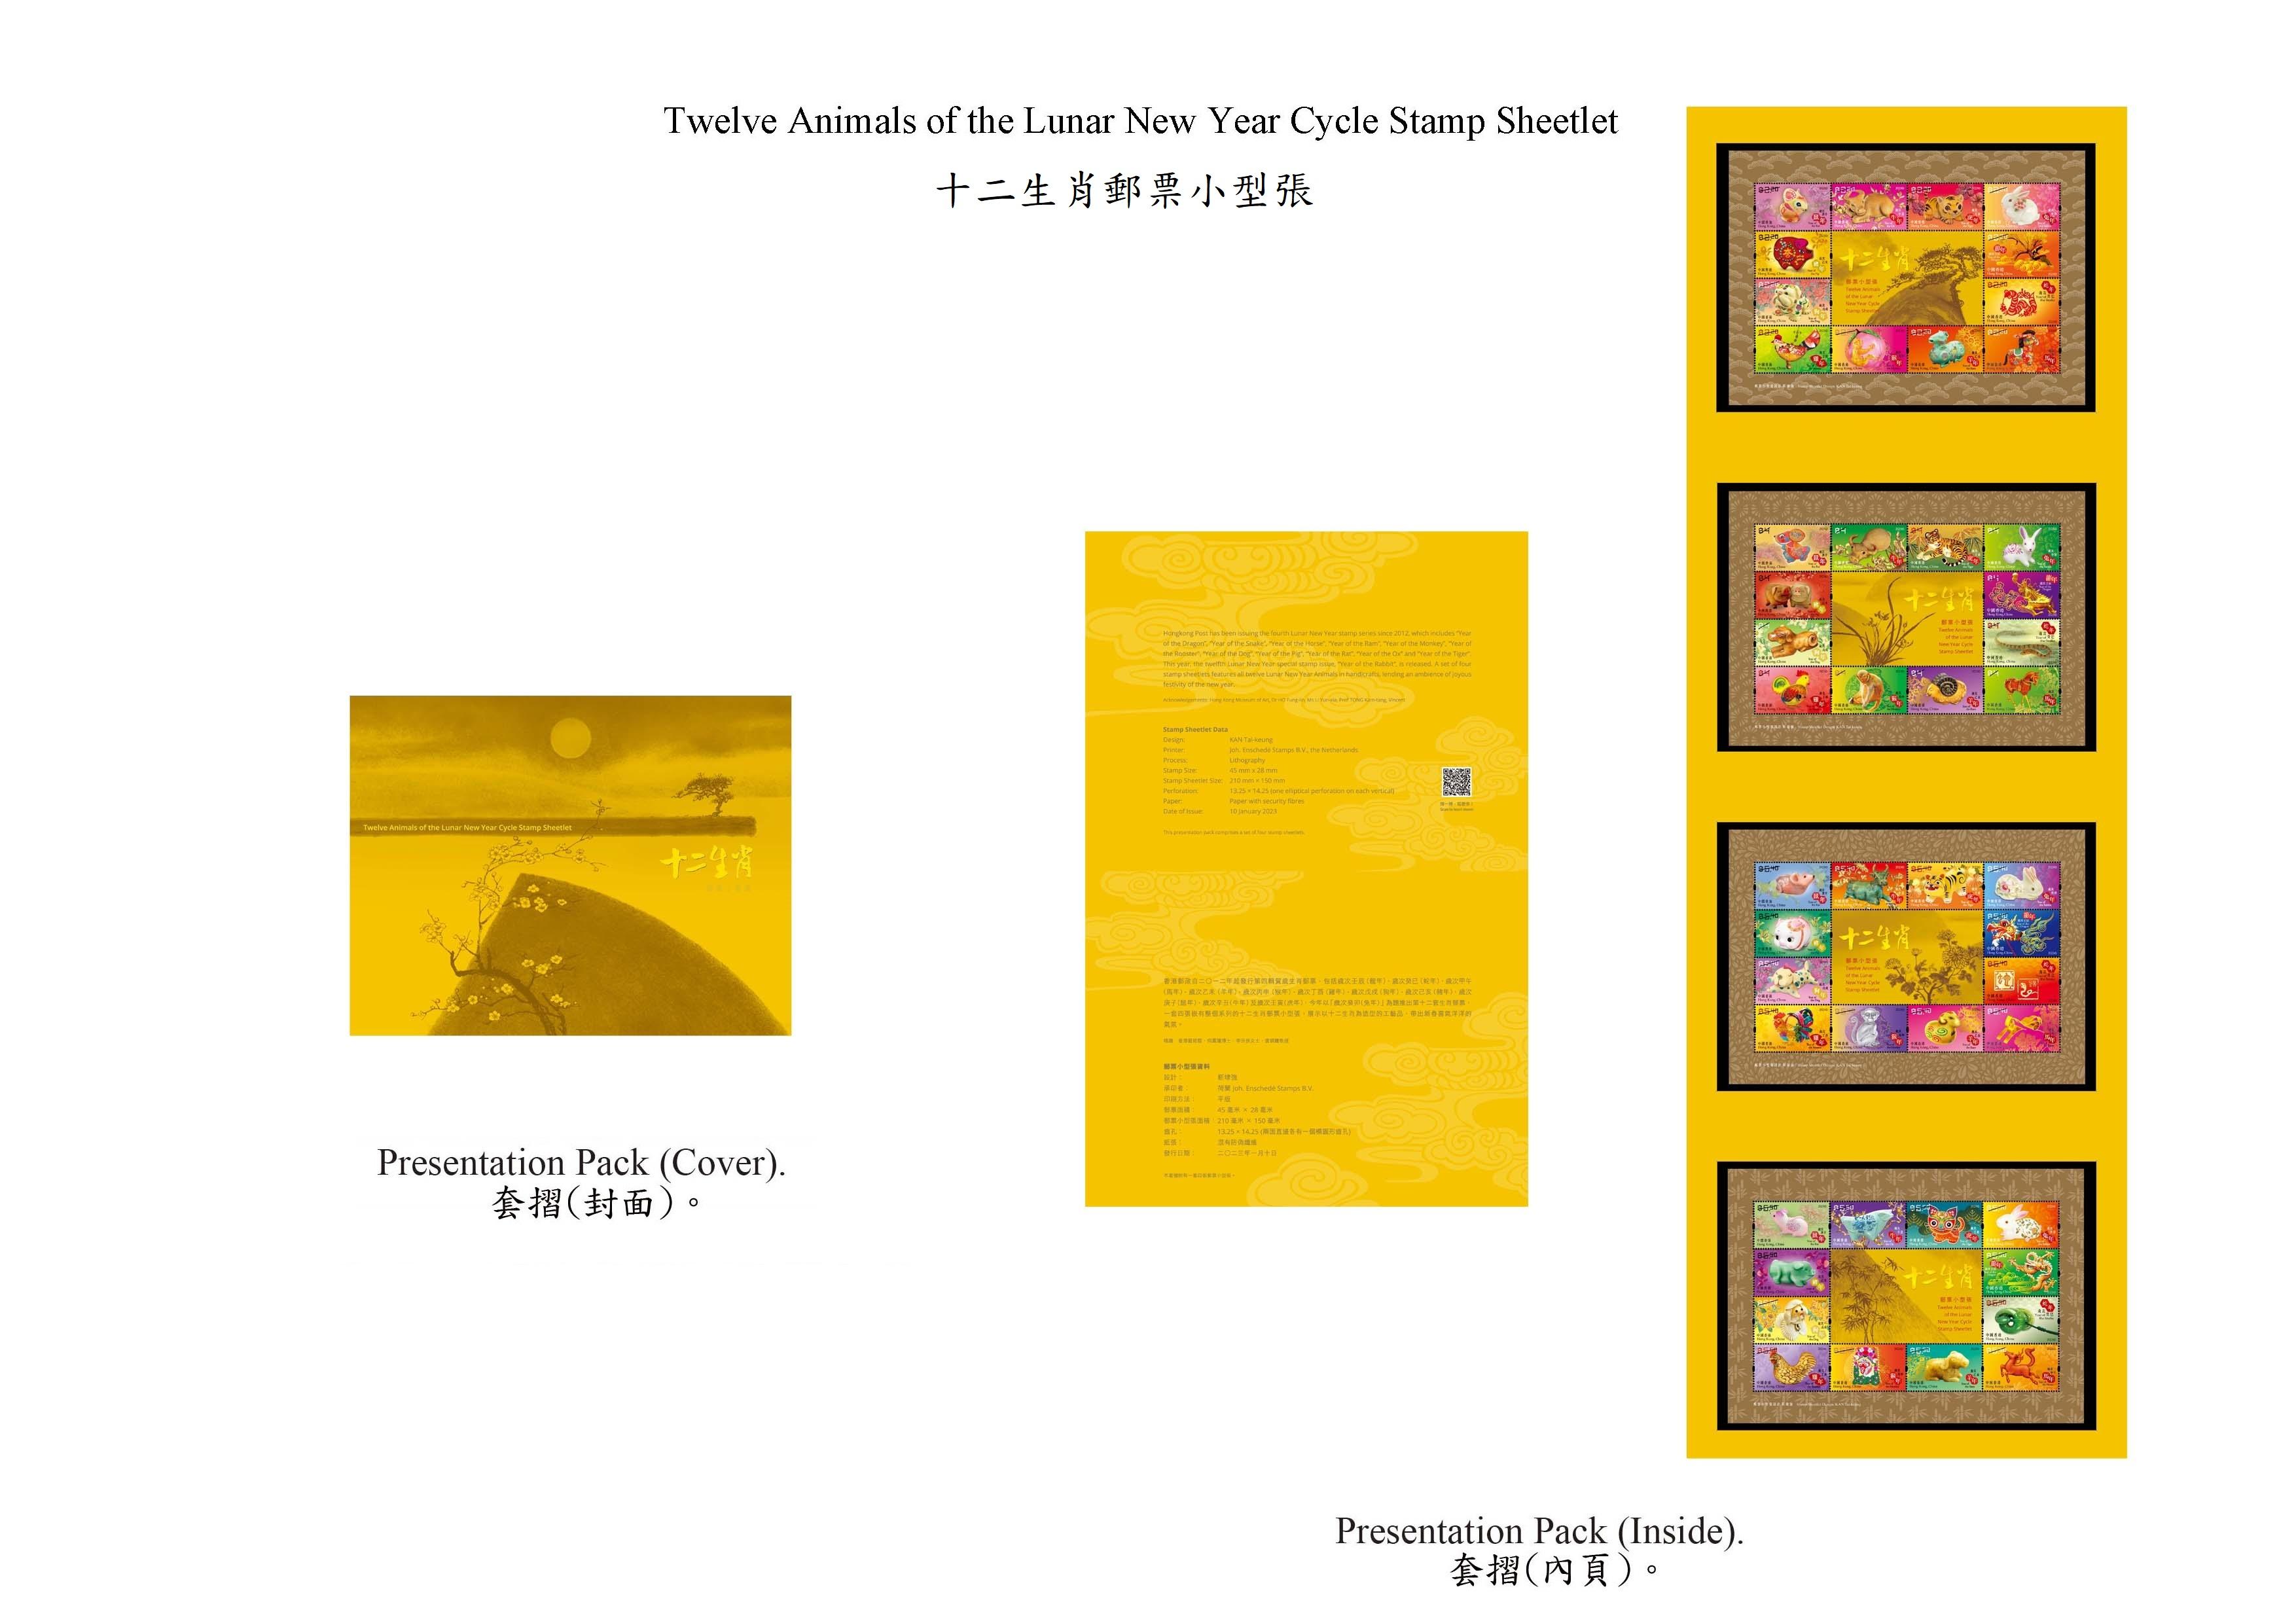 Hongkong Post will launch a special stamp issue and associated philatelic products with the theme "Year of the Rabbit" on January 10, 2023 (Tuesday). The "Twelve Animals of the Lunar New Year Cycle Stamp Sheetlet" will also be launched on the same day. Photo shows the presentation pack.


